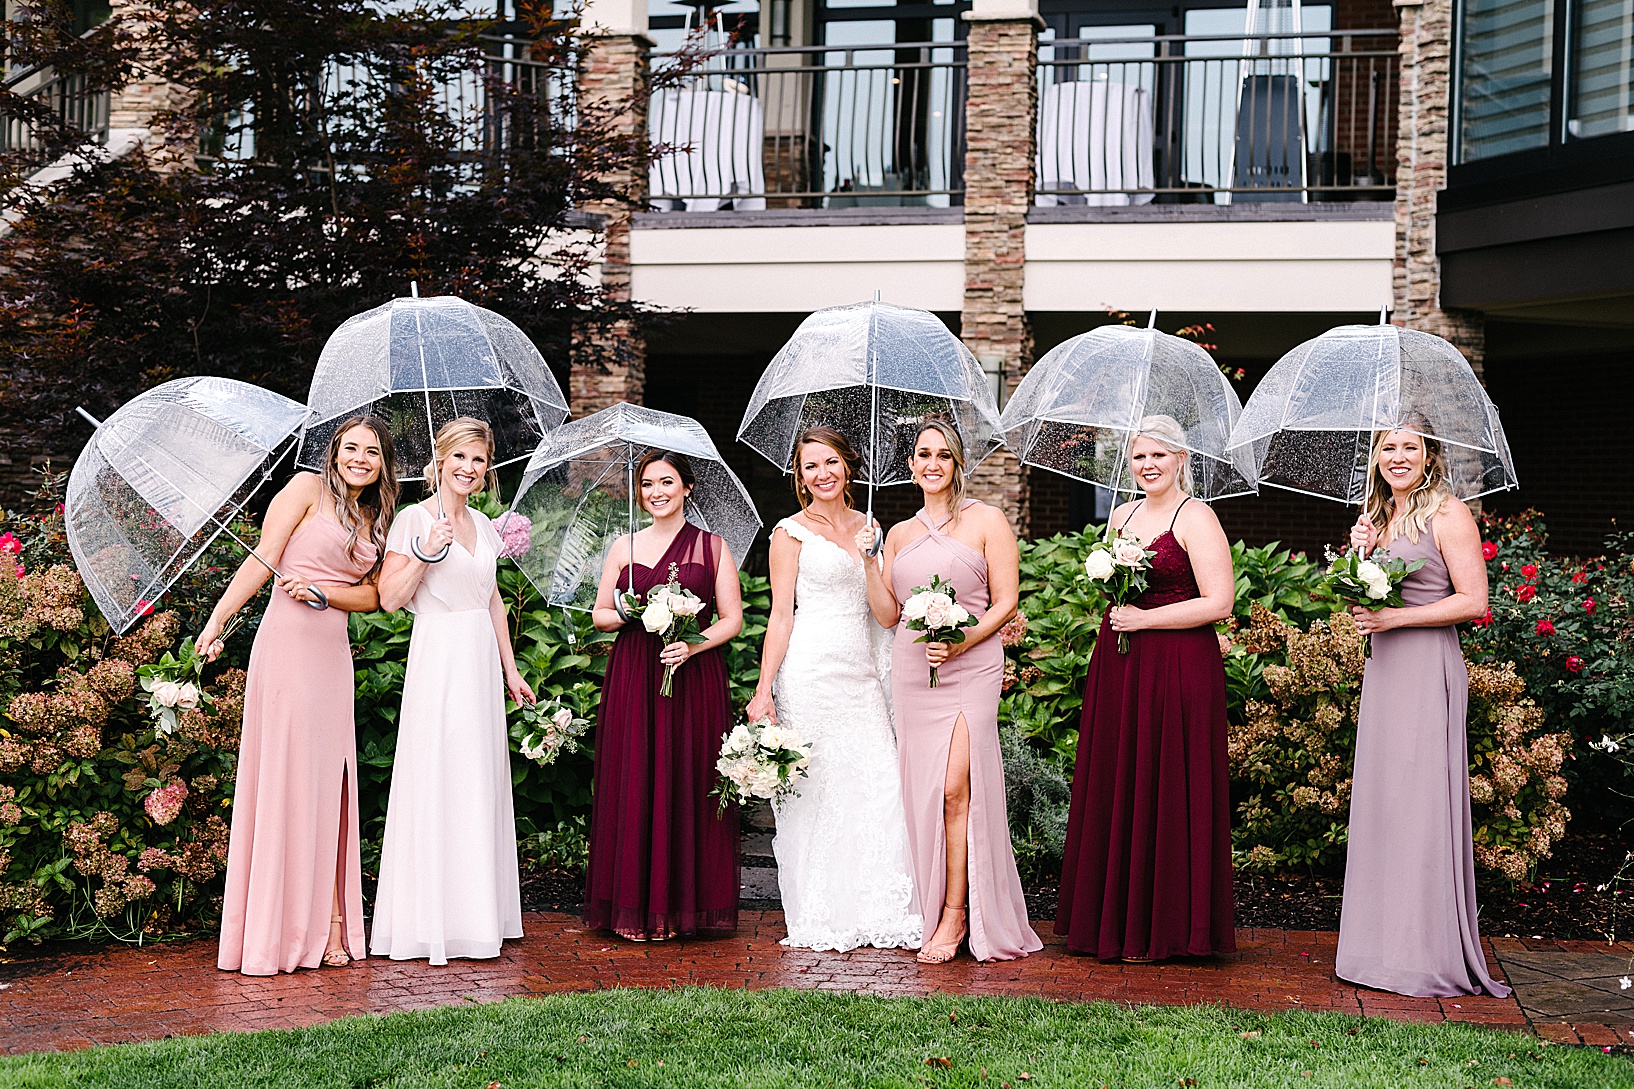 The bridal party and the bride standing on a brick pathway of the Lake Club, holding clear umbrellas.